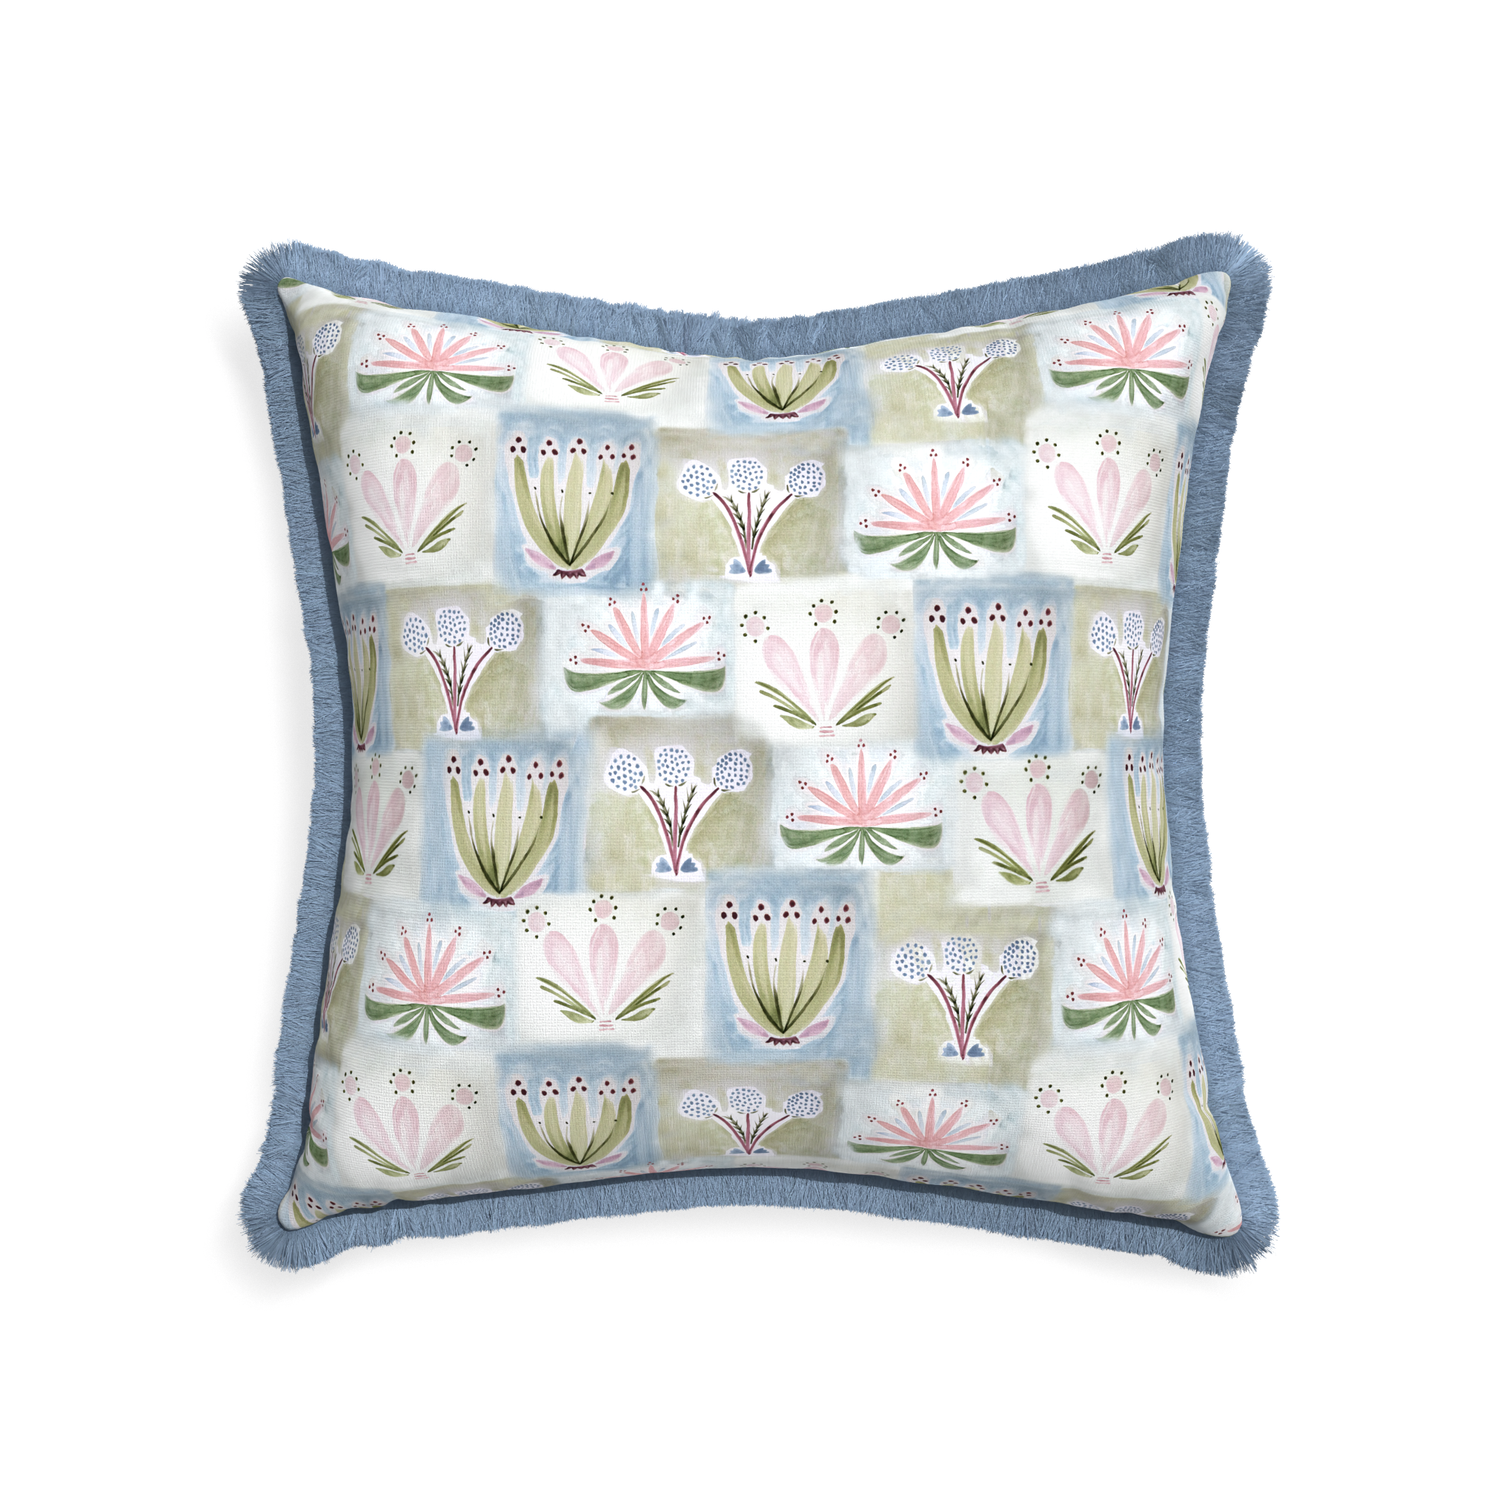 22-square harper custom hand-painted floralpillow with sky fringe on white background